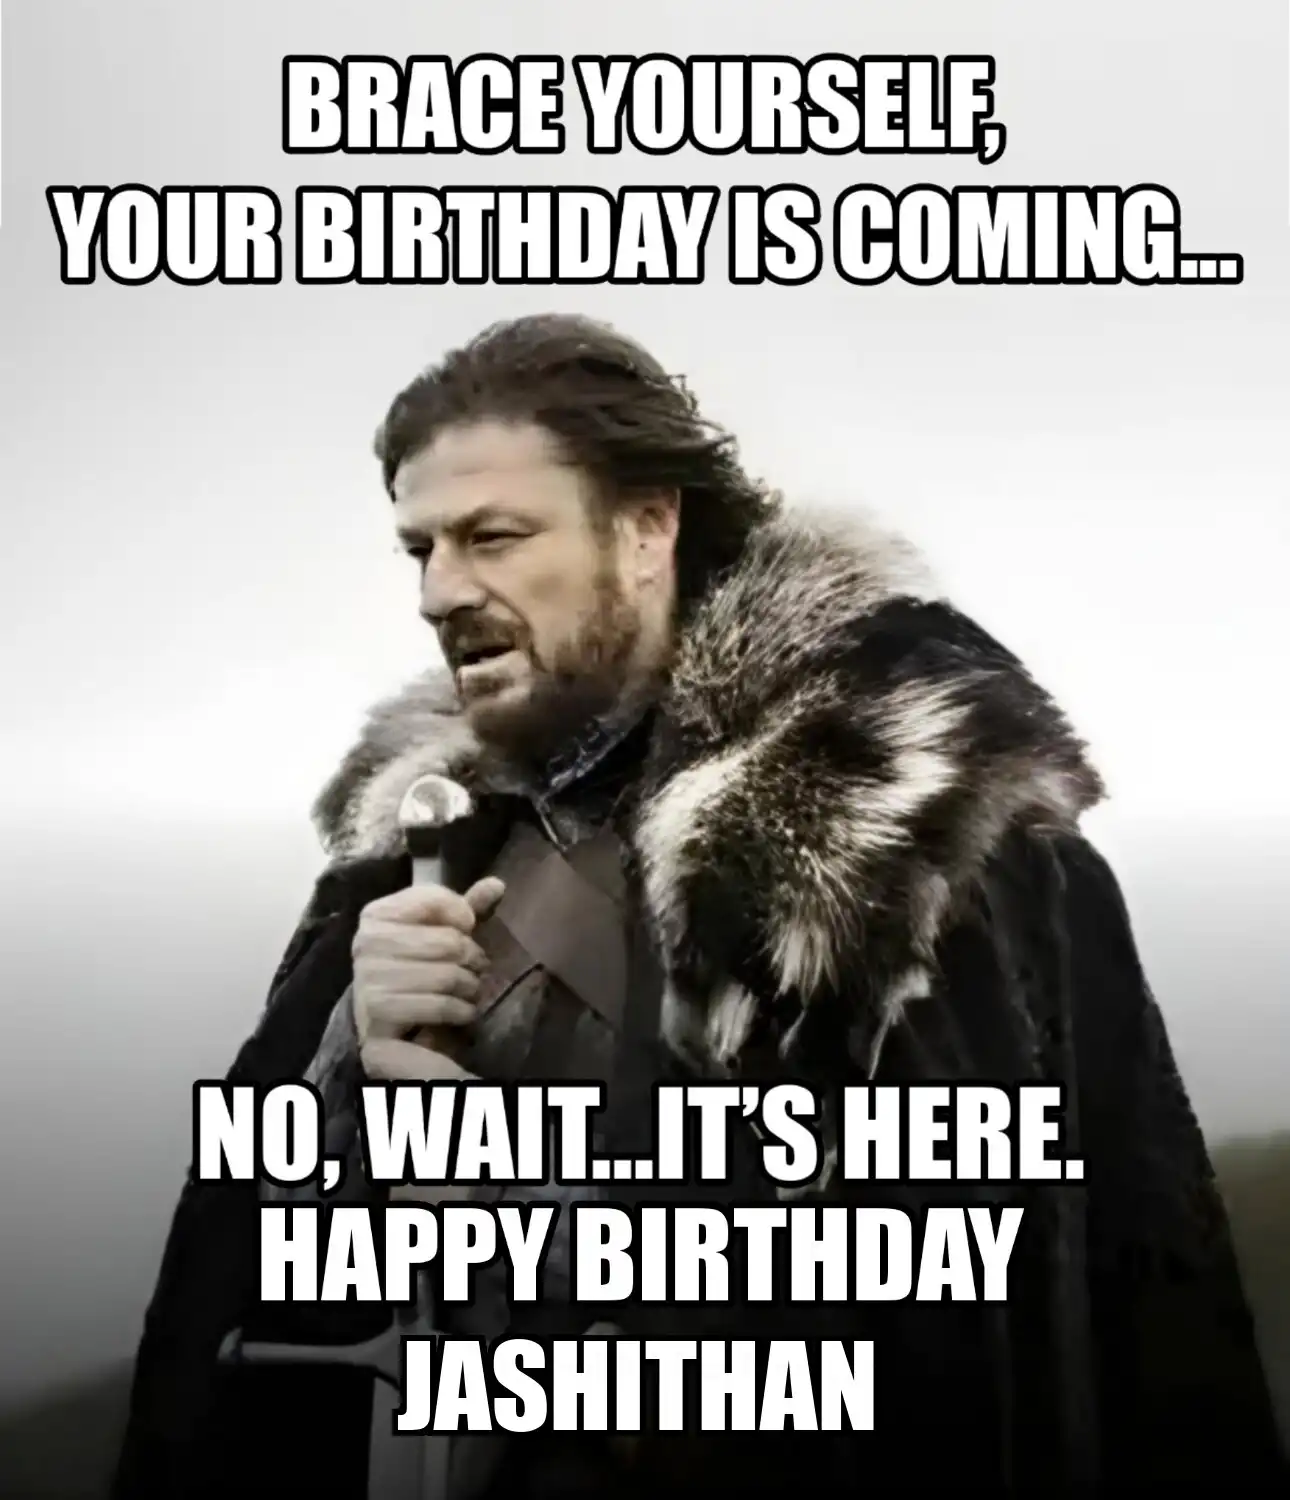 Happy Birthday Jashithan Brace Yourself Your Birthday Is Coming Meme